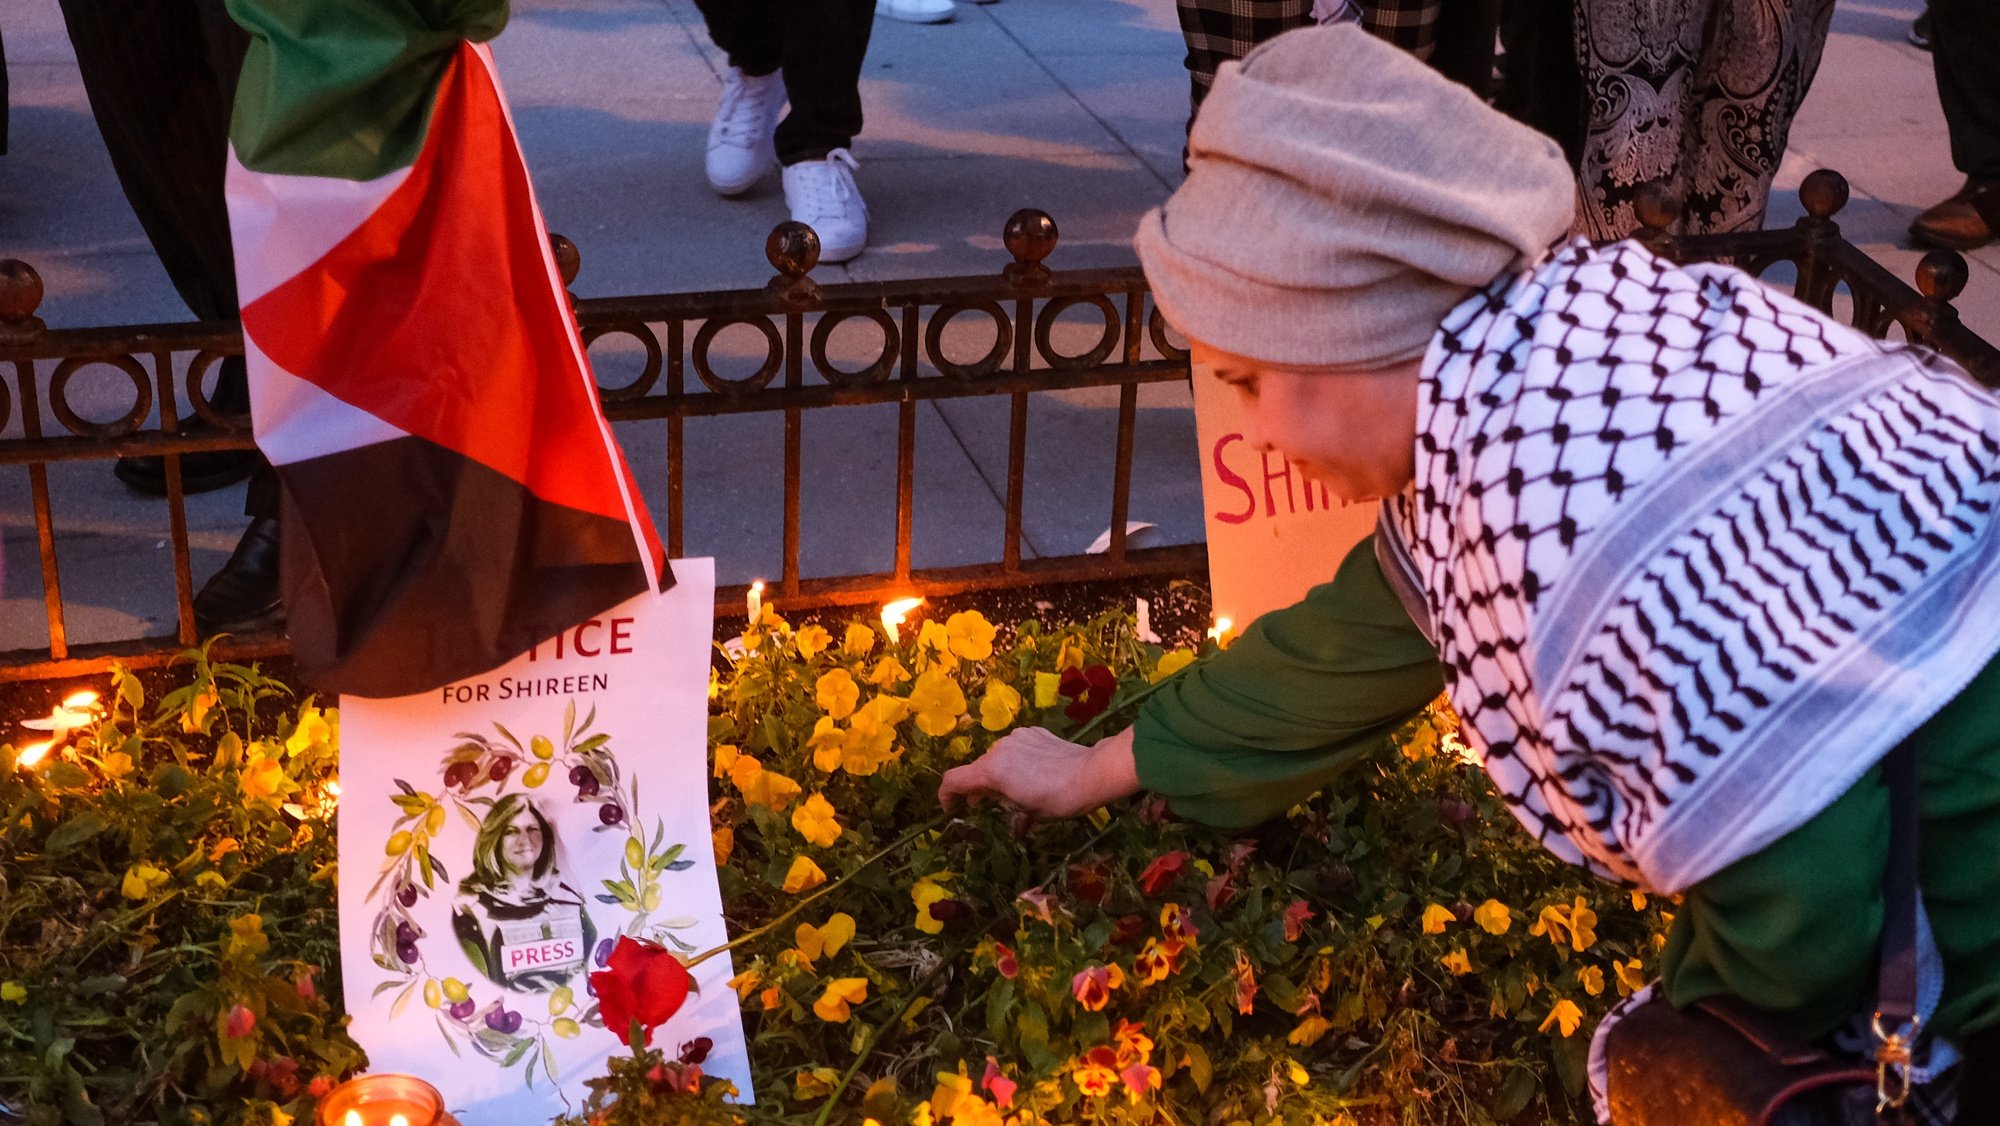 epa09954221 A woman places a flower on a make-shift memorial during a candlelight vigil to honor the slain al-Jazeera Journalist Shireen Abu Akleh, in Washington, DC, USA, 17 May 2022. Al Jazeera journalist Shireen Abu Akleh was killed on 11 May 2022 during a raid by Israeli forces in the West Bank town of Jenin.  EPA/GAMAL DIAB